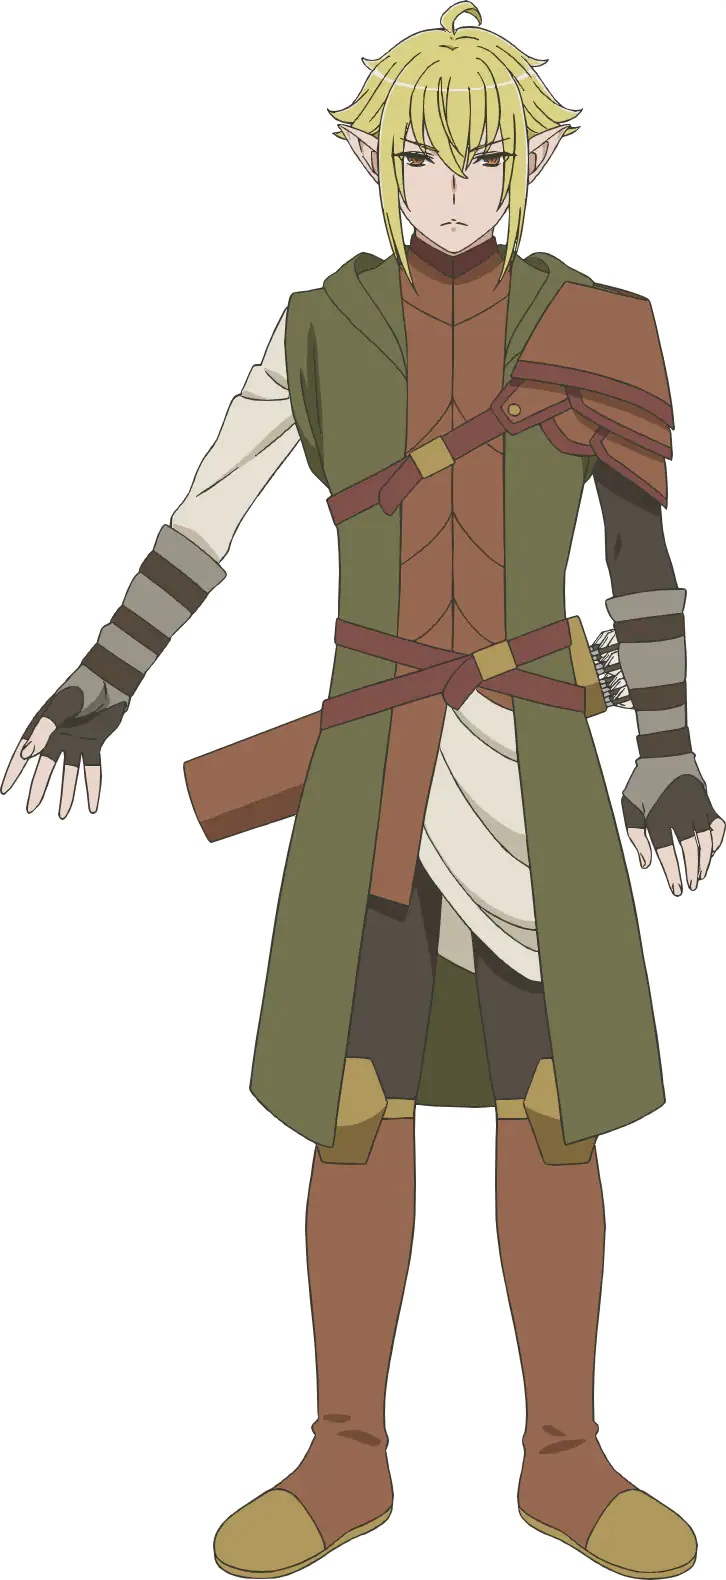 A character setting of Luvis Lilix from the upcoming 4th season of the Is It Wrong to Try to Pick Up Girls in a Dungeon? TV anime. Luvis is stern-faced elf with blonde hair and brown eyes. He wears leather armor and a forest green cloak and carries a quiver of arrows slung at his hips.